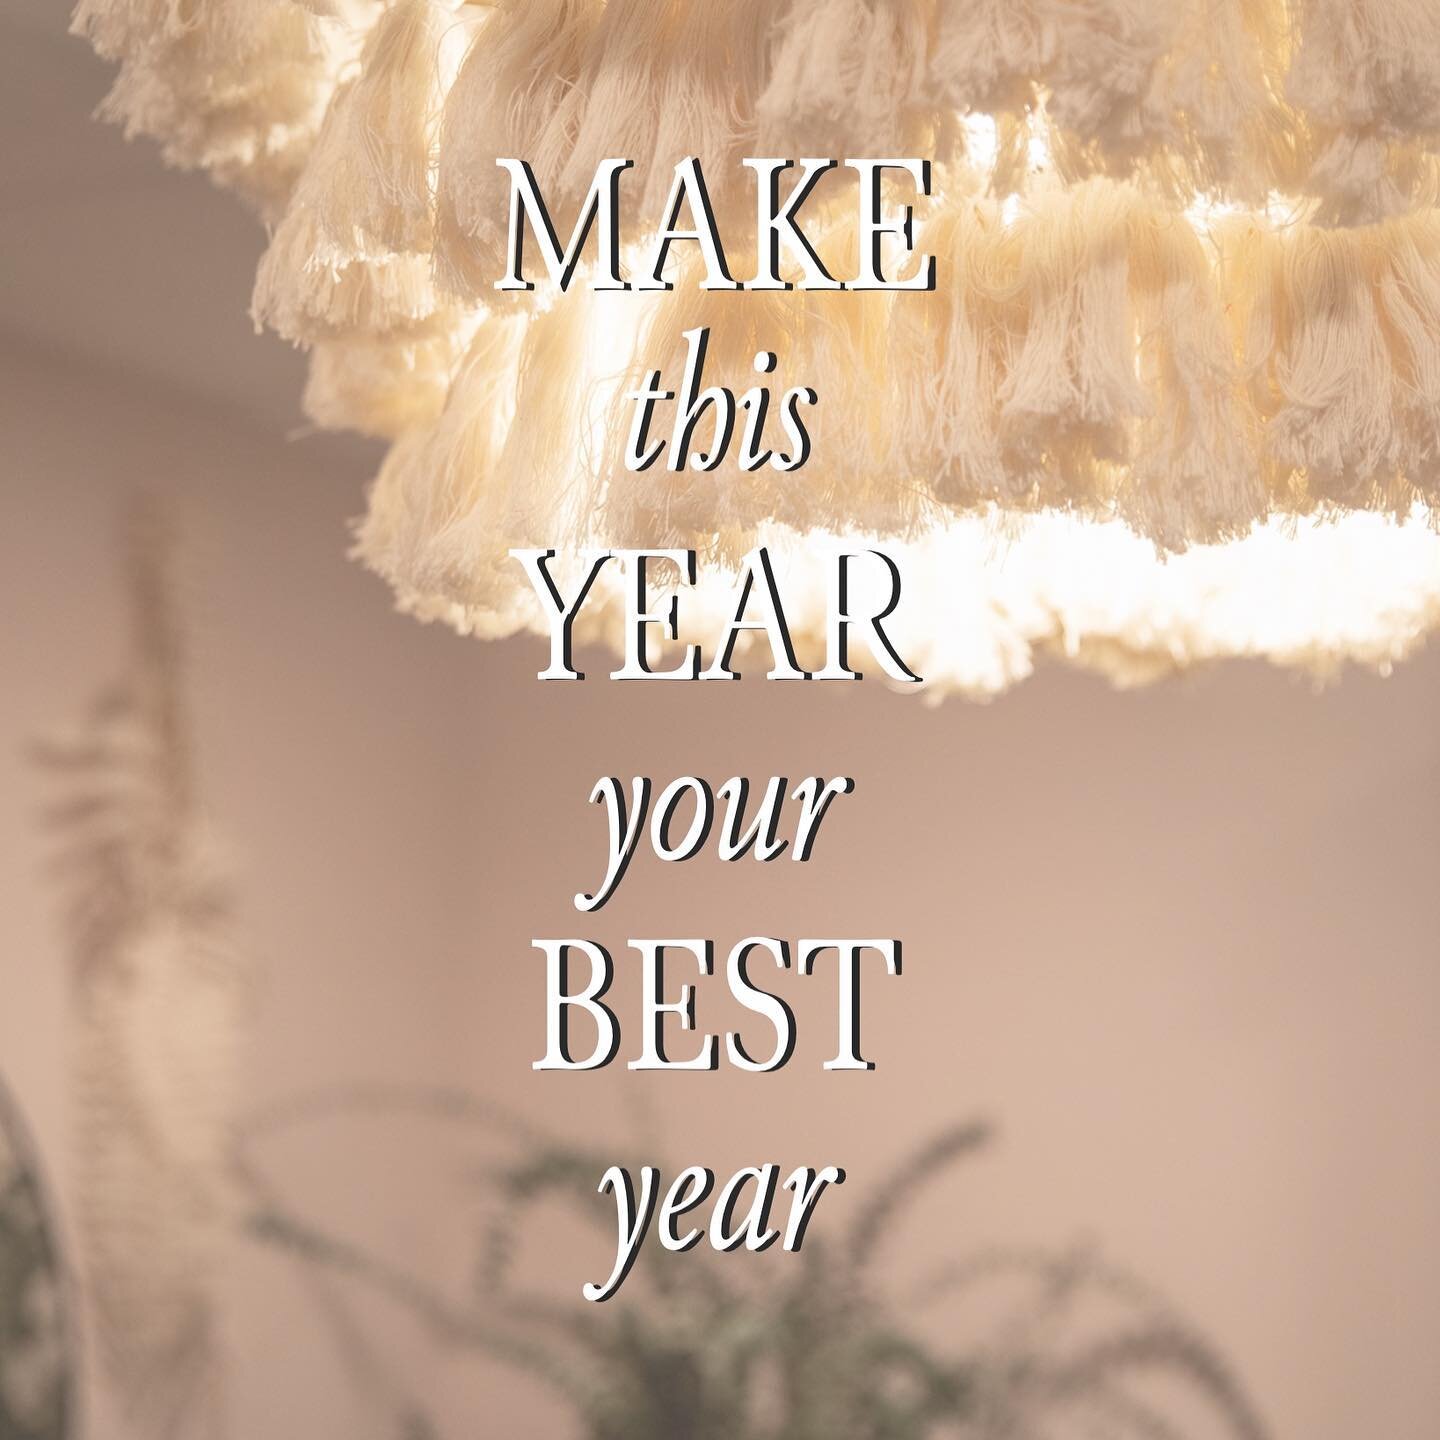 ✨HAPPY NEW YEAR✨
Have a dream of owning your own salon? 
2022 sounds like the perfect year to make your dreams come true! 

#citysuitessalonandspas #salonsuite #newyear #ownyourown #owosso